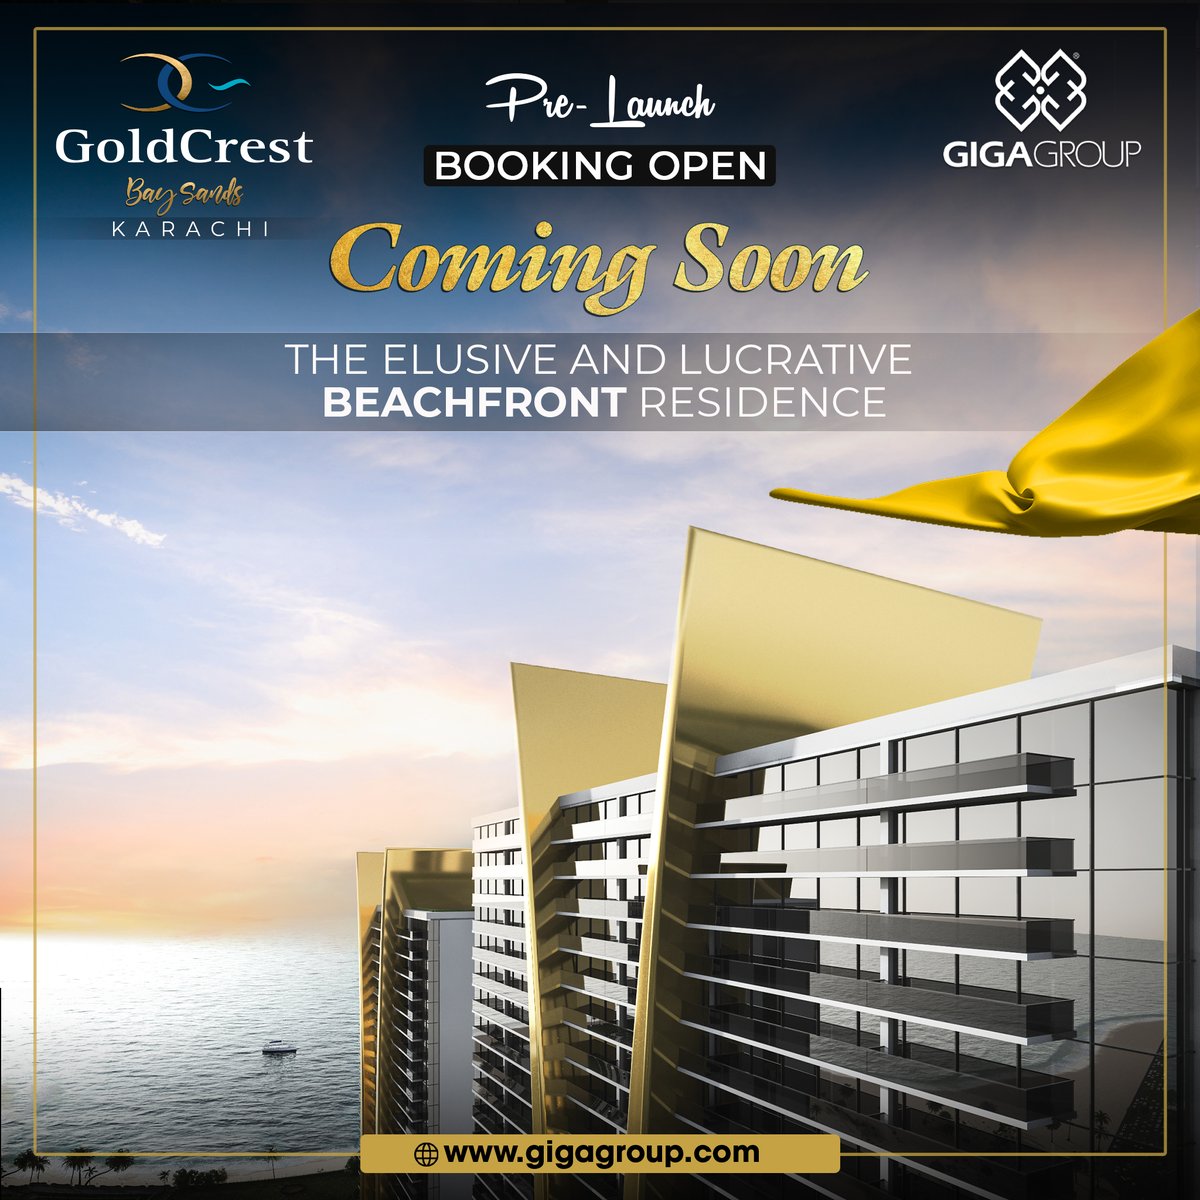 𝐀𝐯𝐚𝐢𝐥 𝐭𝐡𝐞 𝐏𝐫𝐞-𝐋𝐚𝐮𝐧𝐜𝐡 𝐎𝐟𝐟𝐞𝐫! The elusive and lucrative beachfront residence! Coming Soon - 𝐆𝐨𝐥𝐝𝐜𝐫𝐞𝐬𝐭 𝐁𝐚𝐲 𝐒𝐚𝐧𝐝𝐬 𝐊𝐚𝐫𝐚𝐜𝐡𝐢 - HMR Waterfront For more details call us at 0304 111 0073 𝑼𝑨𝑵: 0304 111 0073 or visit 𝑾𝒆𝒃𝒔𝒊𝒕𝒆:…